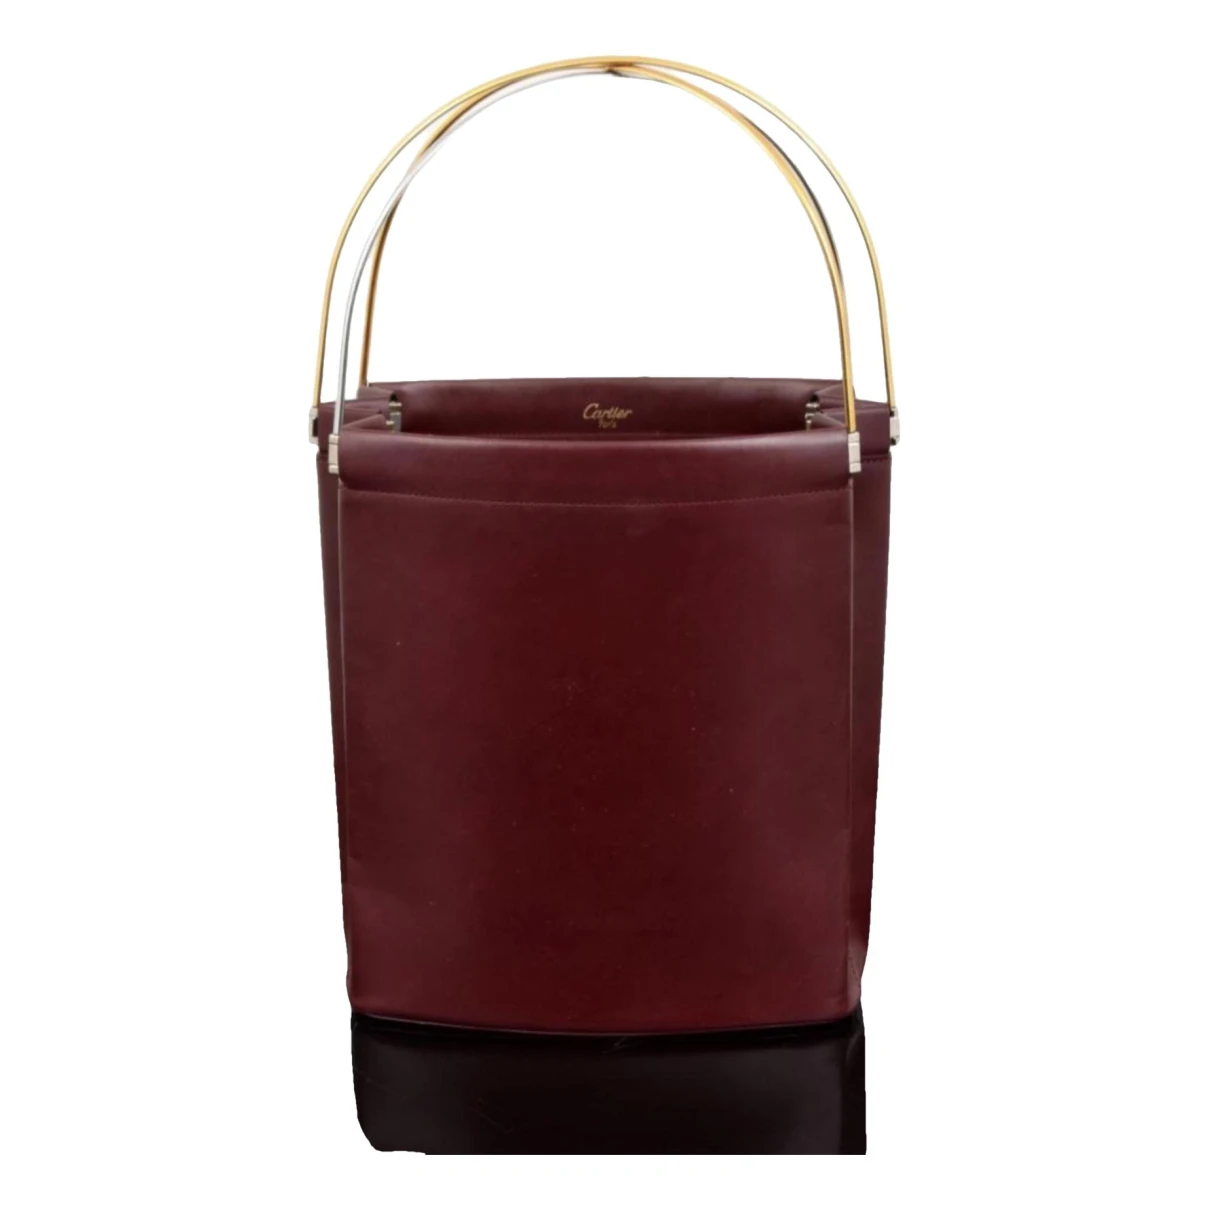 Pre-owned Cartier Trinity Leather Handbag In Burgundy